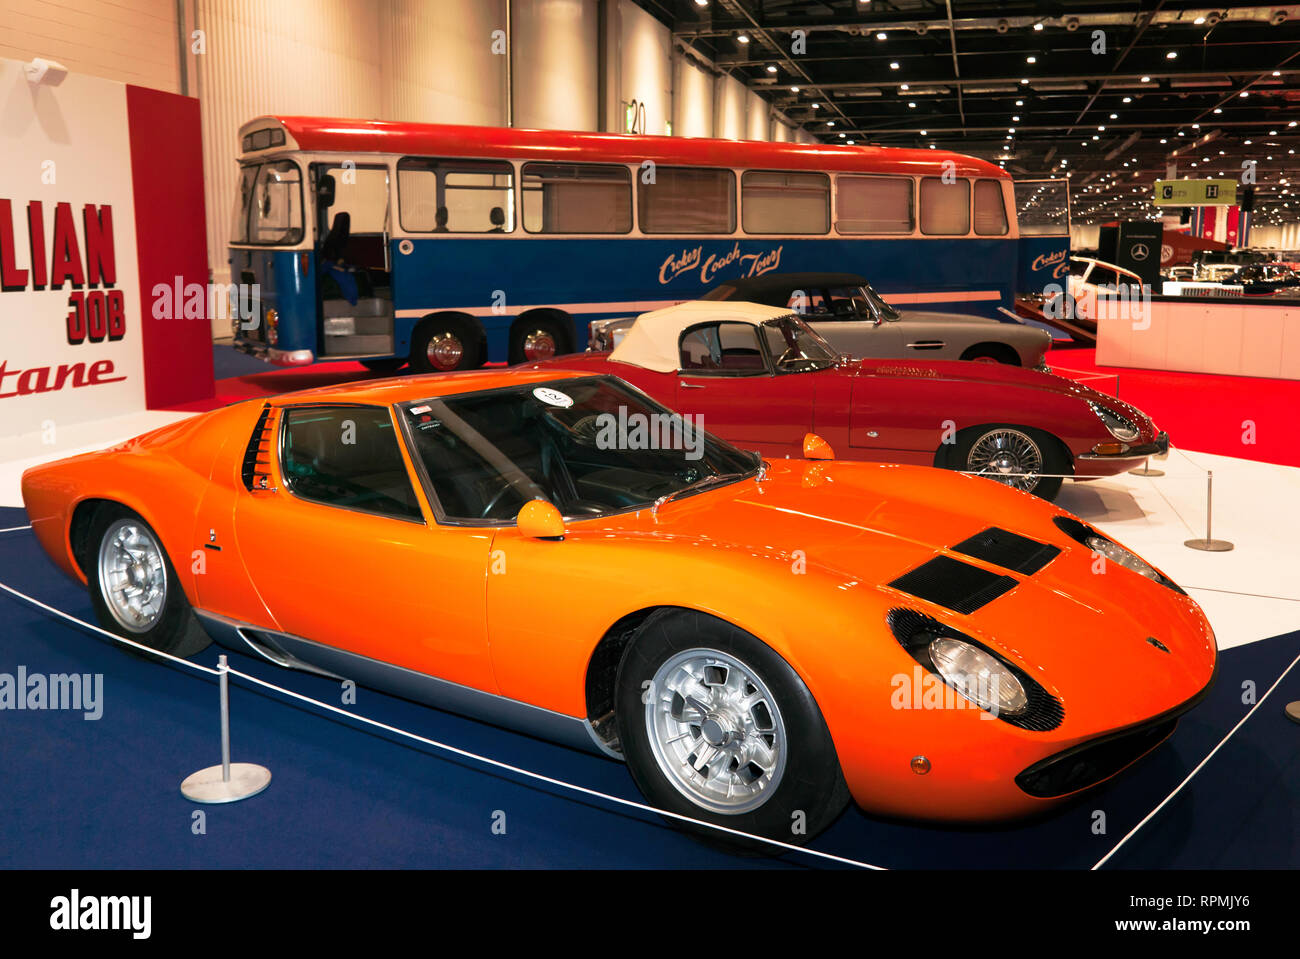 The Lamborghini Miura and two Jaguar E-types which featured in iconic British film 'The Italian Job' on display at the 2019 London Classic Car Show Stock Photo